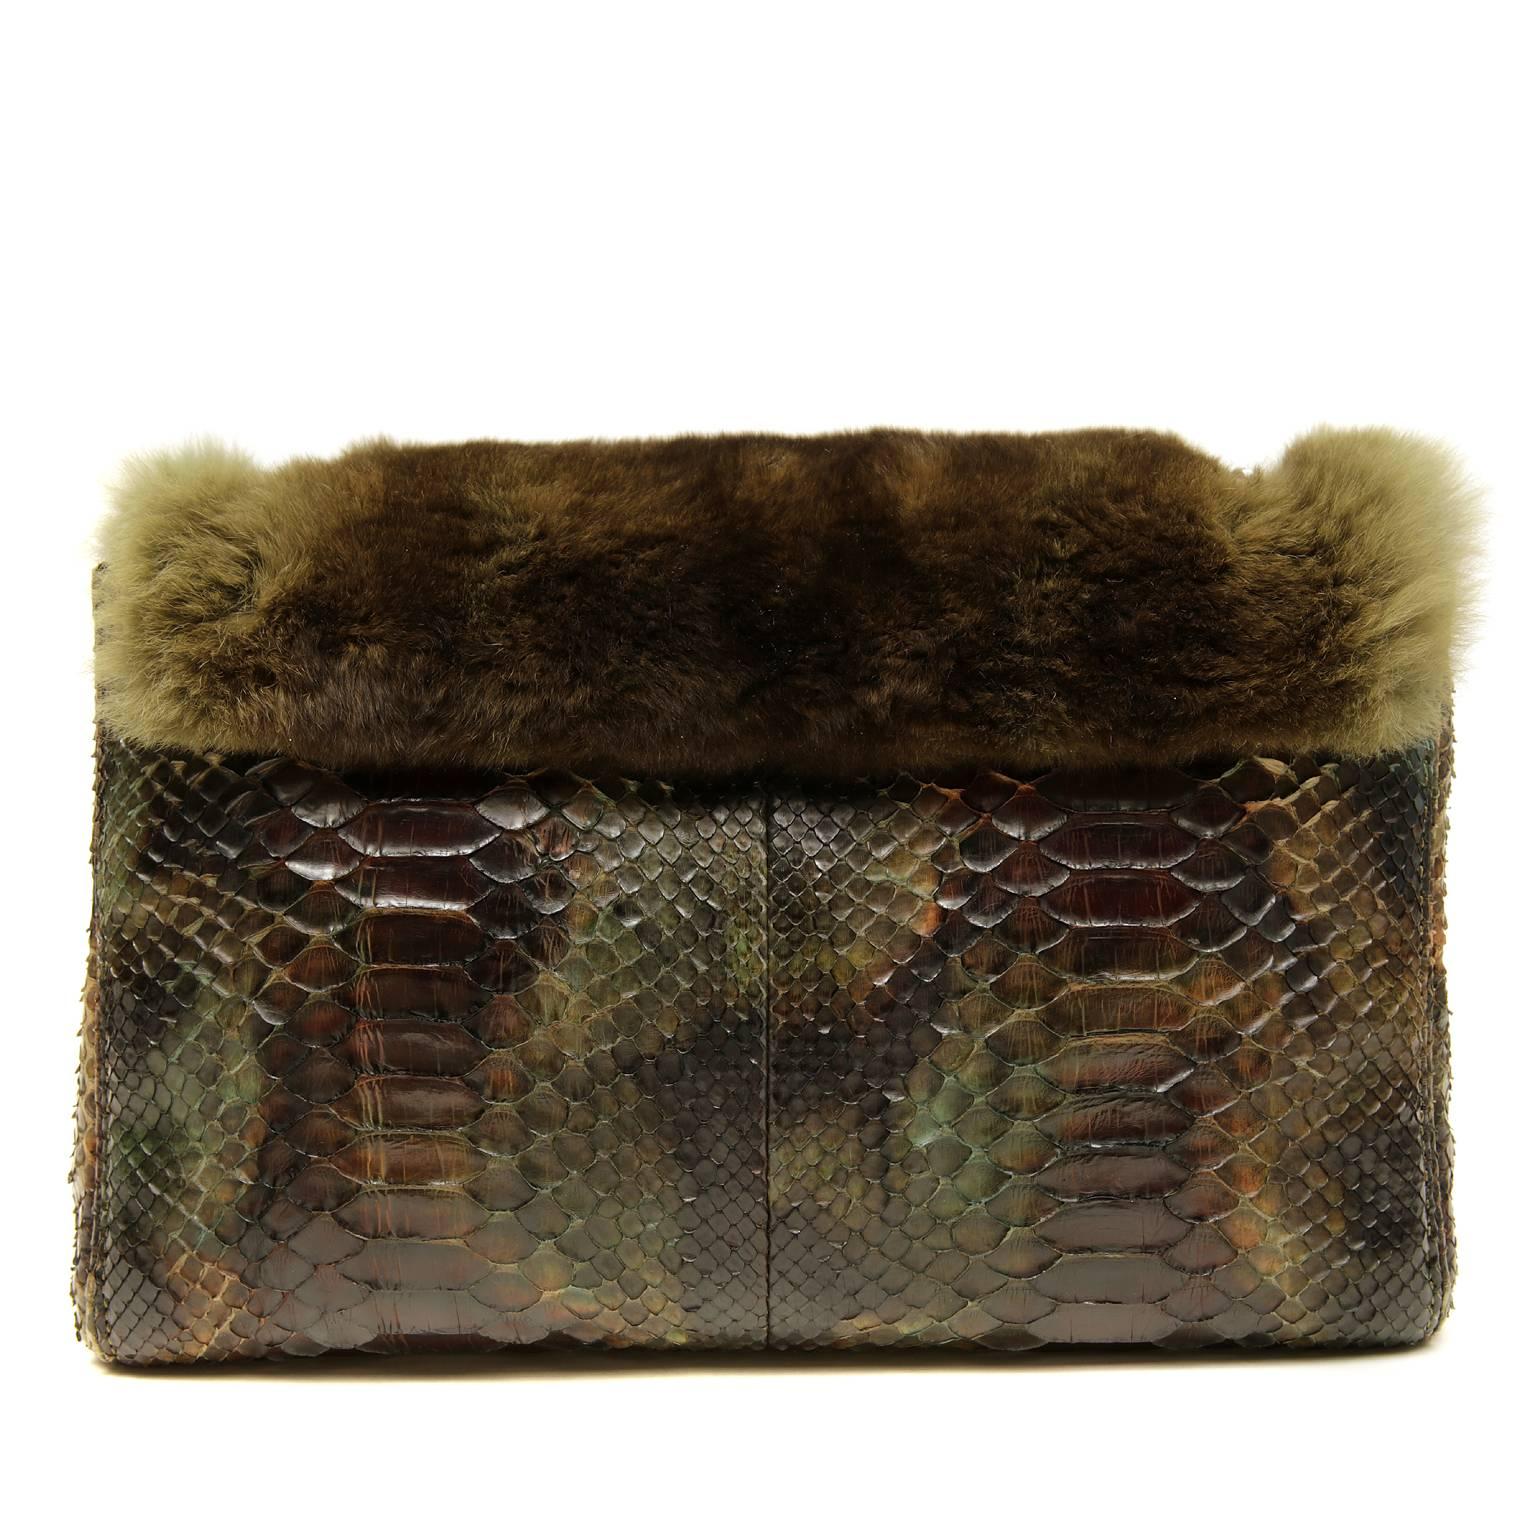 Chanel Green and Brown Chinchilla Python Combo Flap Bag- Near Pristine Condition
  This unique exotic is exquisite; it combines texture and color in a totally unexpected way.  It is rare and collectible.
Multi-hued artichoke green and soft brown